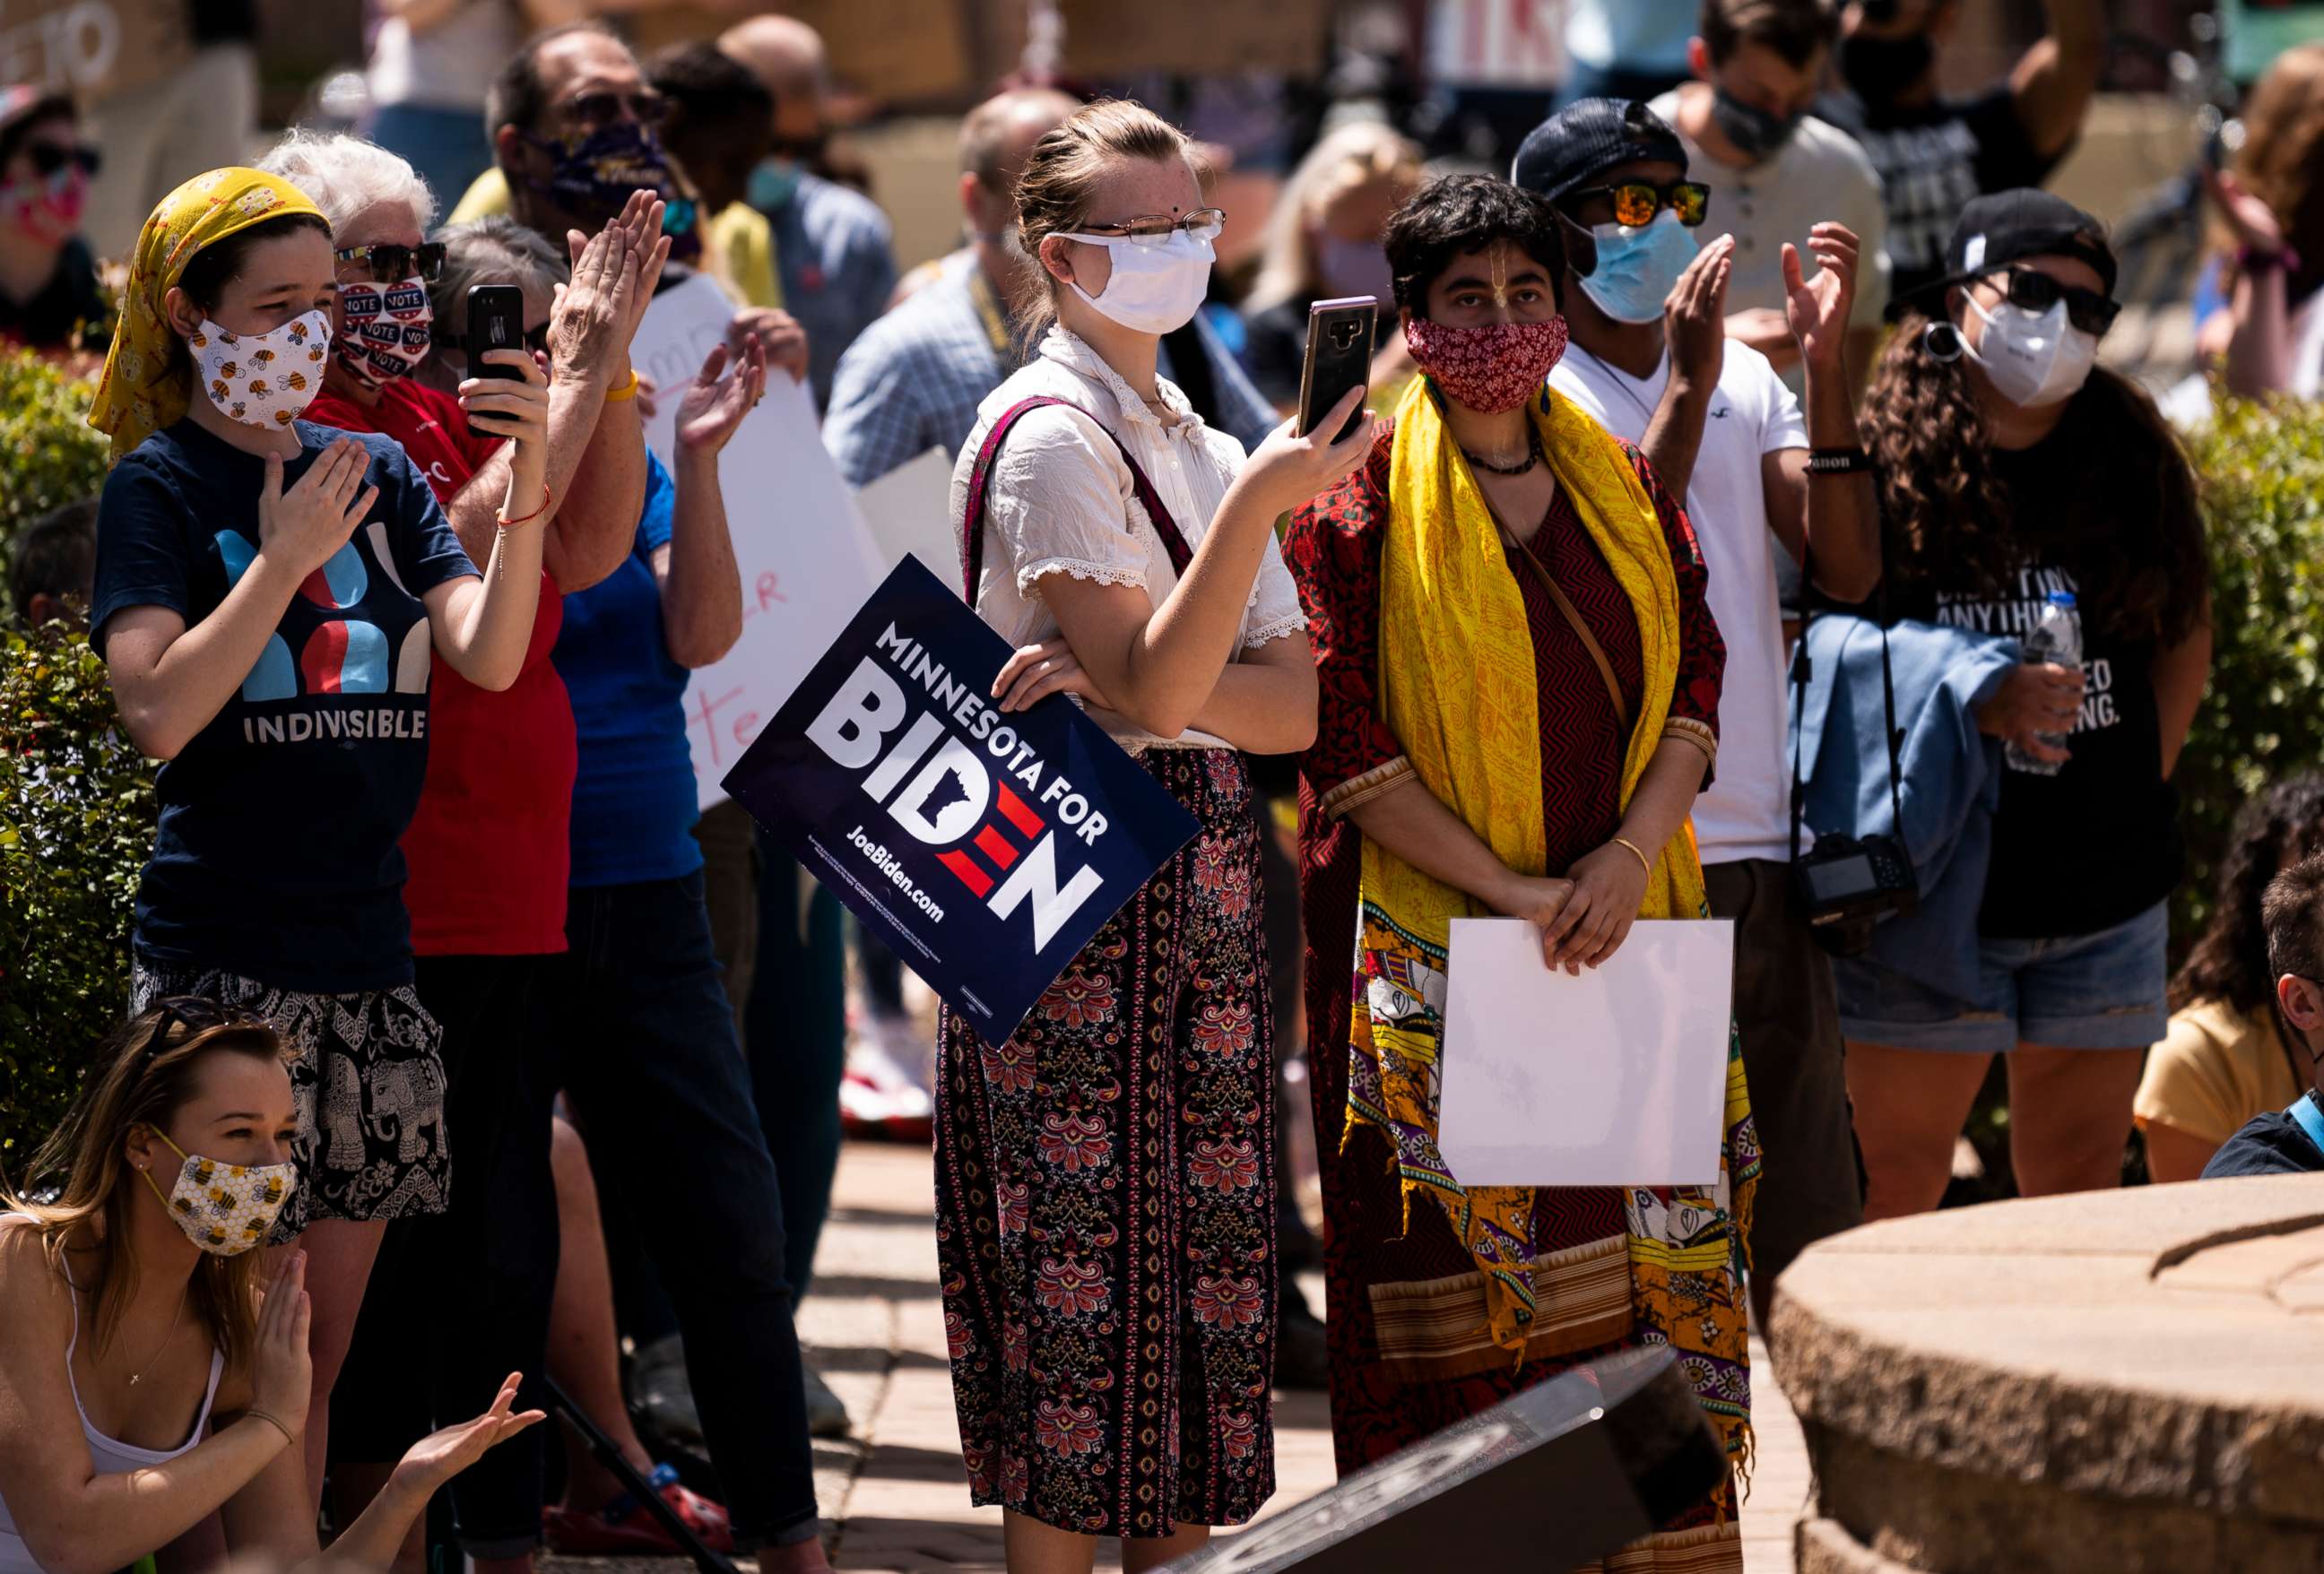 PHOTO: A woman holds a sign that reads "Minnesota for Biden" as protesters gather in downtown while President Donald Trump makes a campaign stop at Mankato Regional Airport on Aug. 17, 2020, in Mankato, Minn.